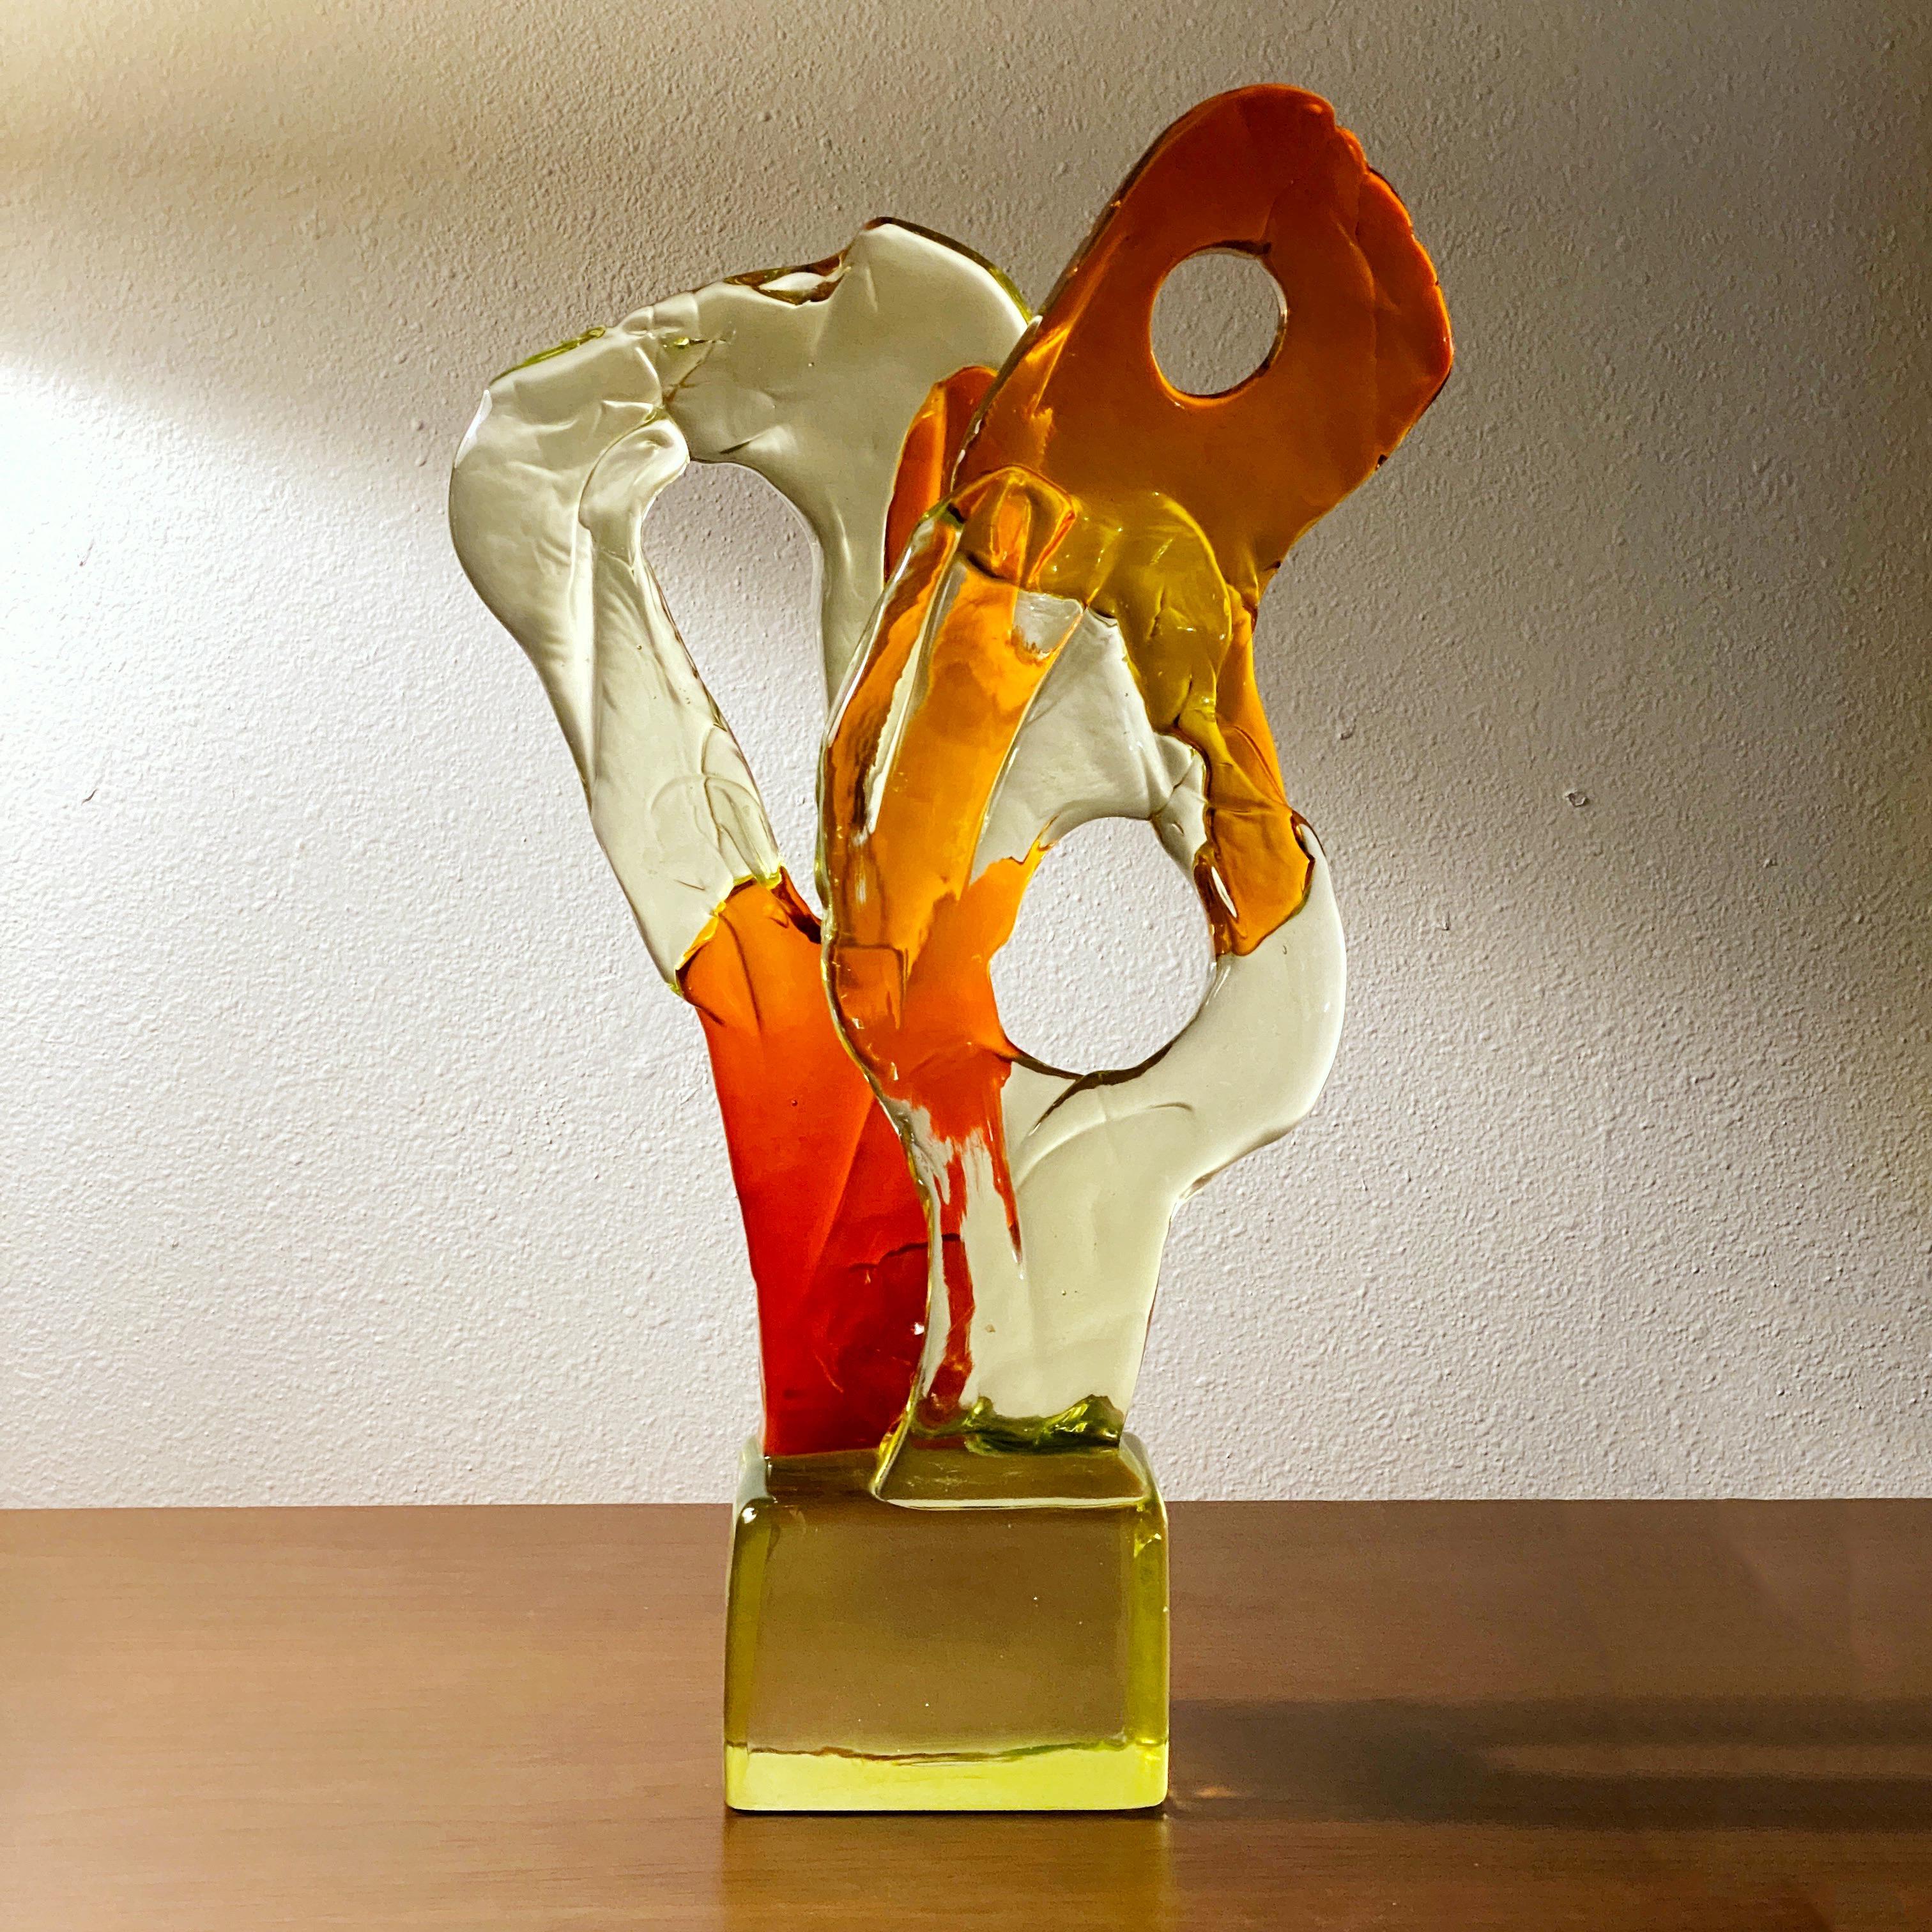 Luciano Gaspari (1913-2007) for Salviati Abstract Glass Sculpture in a beautiful coloration of yellows and lighter and dark oranges, circa 1960s. 

Sculpture measures 18-1/4